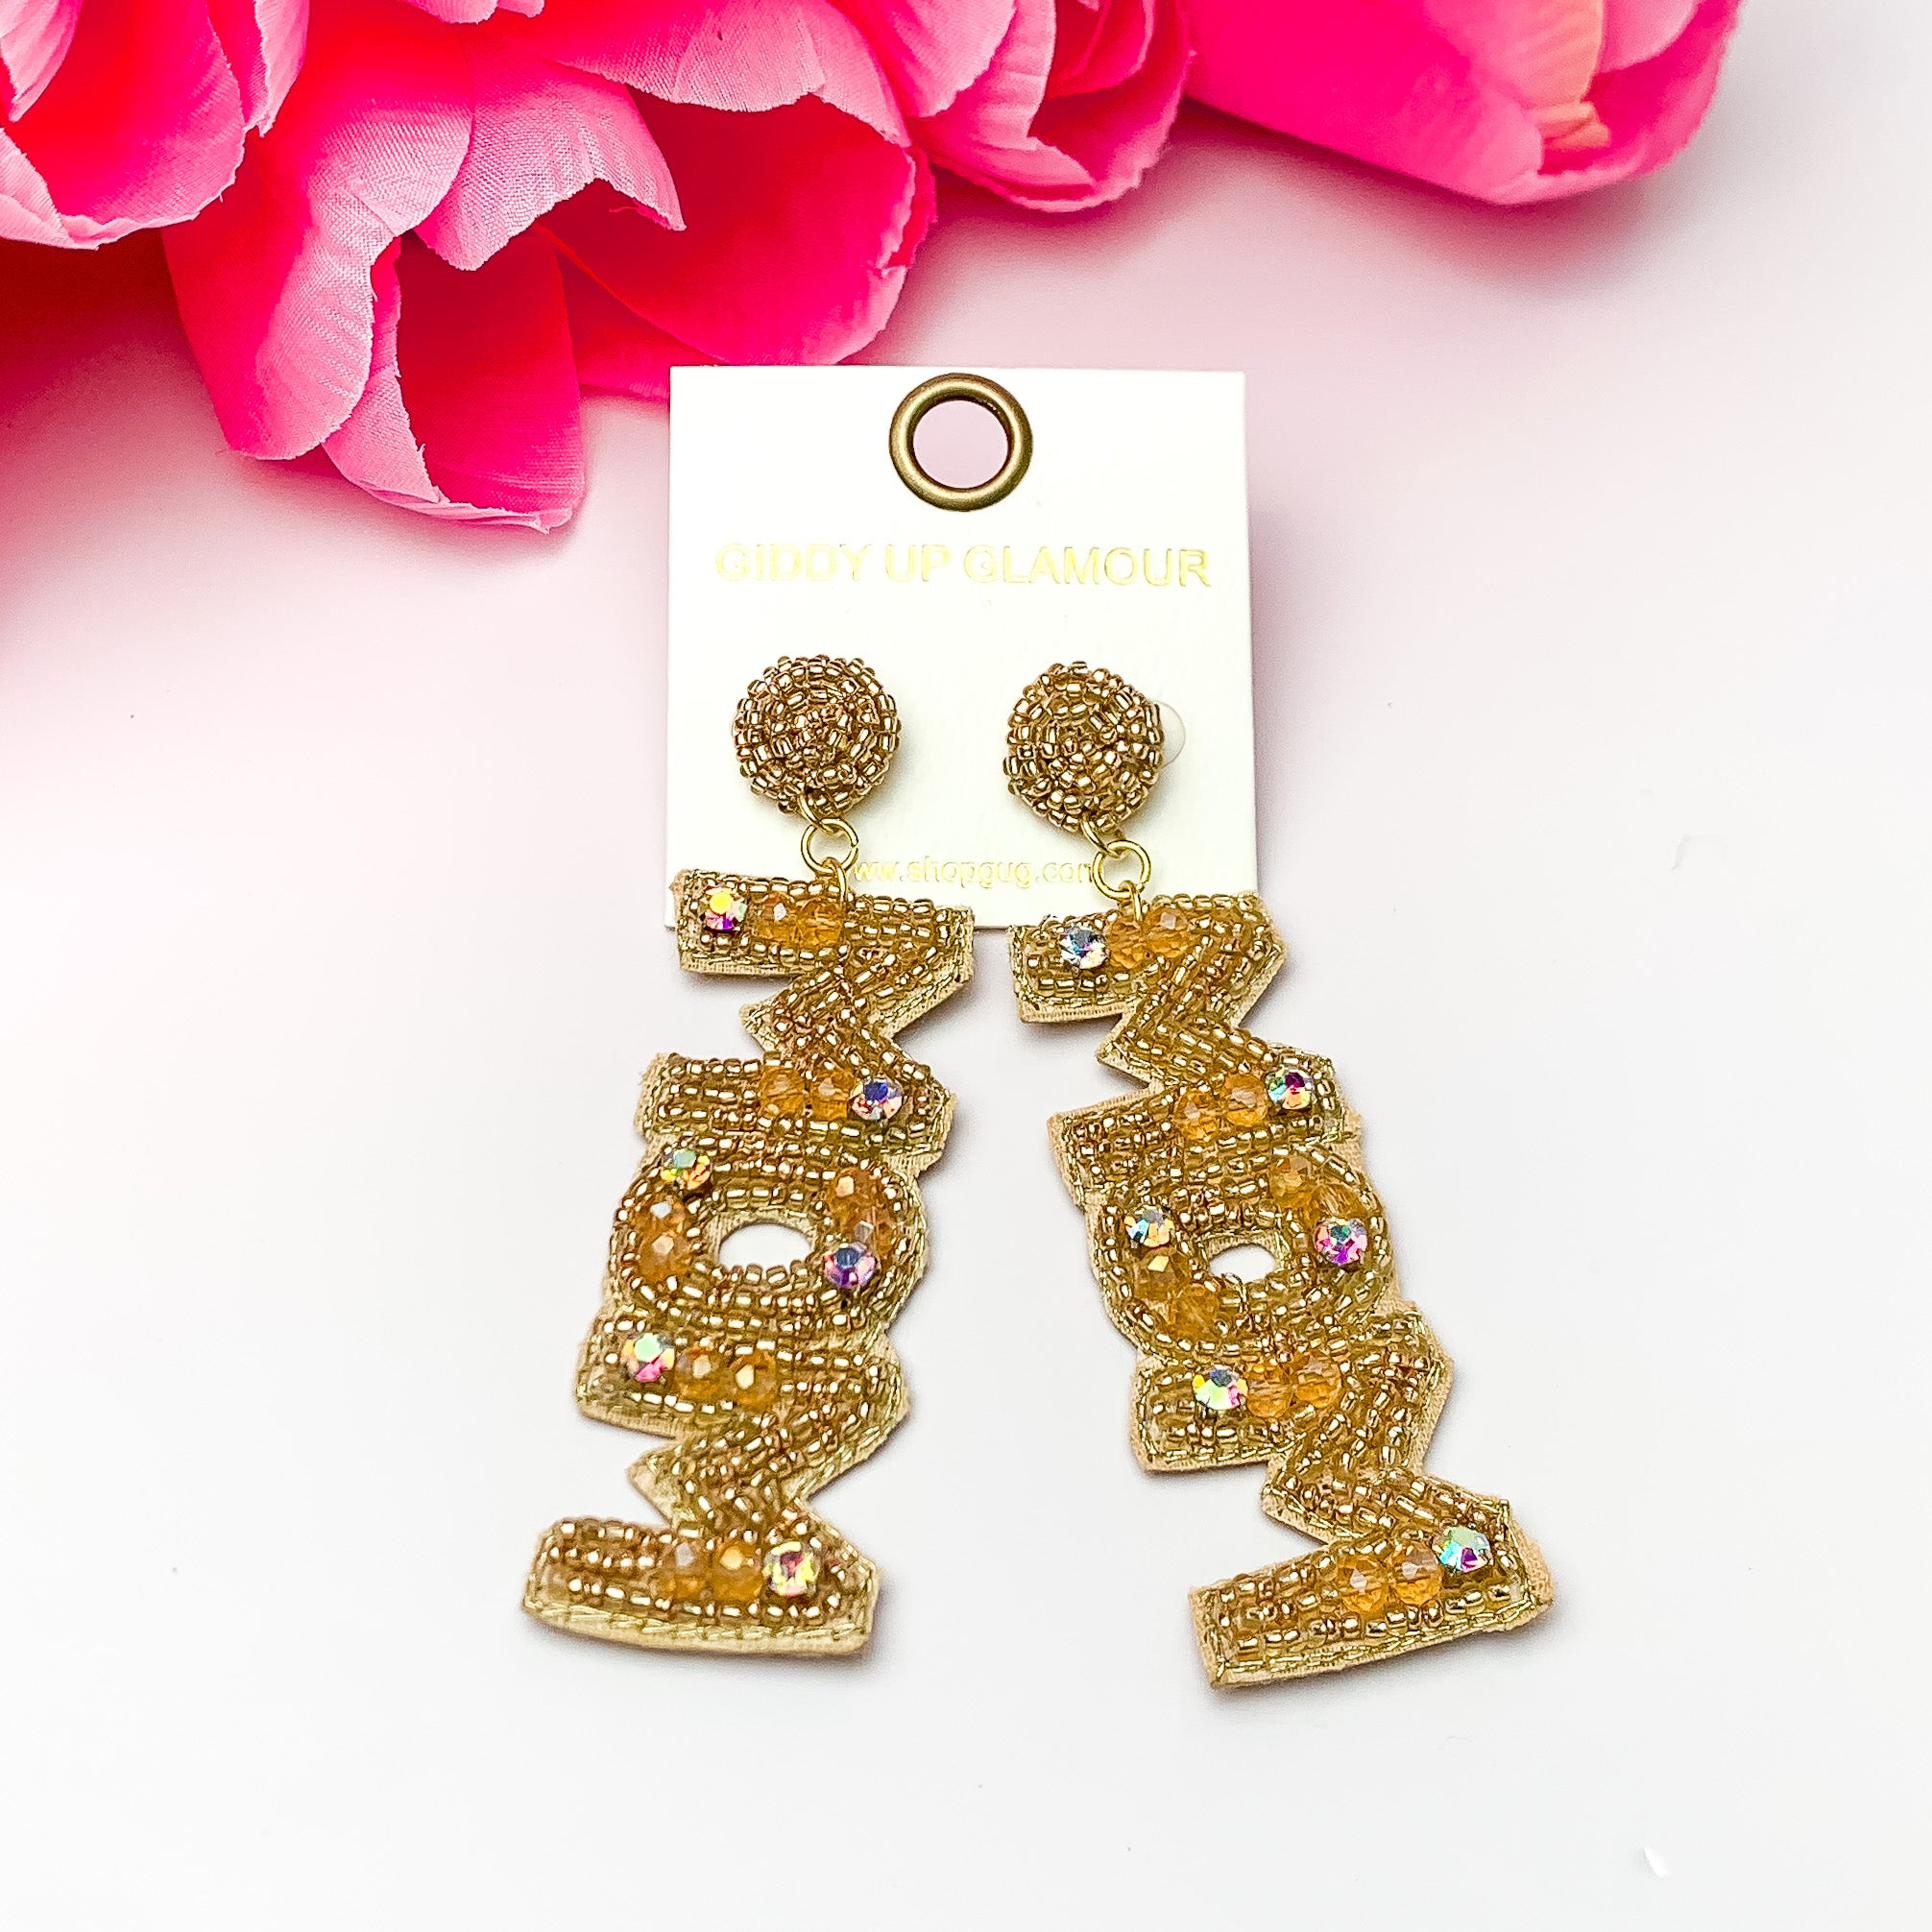 These are gold beaded and ab crystal earrings with a drop that says, MOM. These earrings are taken on a white background with pink flowers.